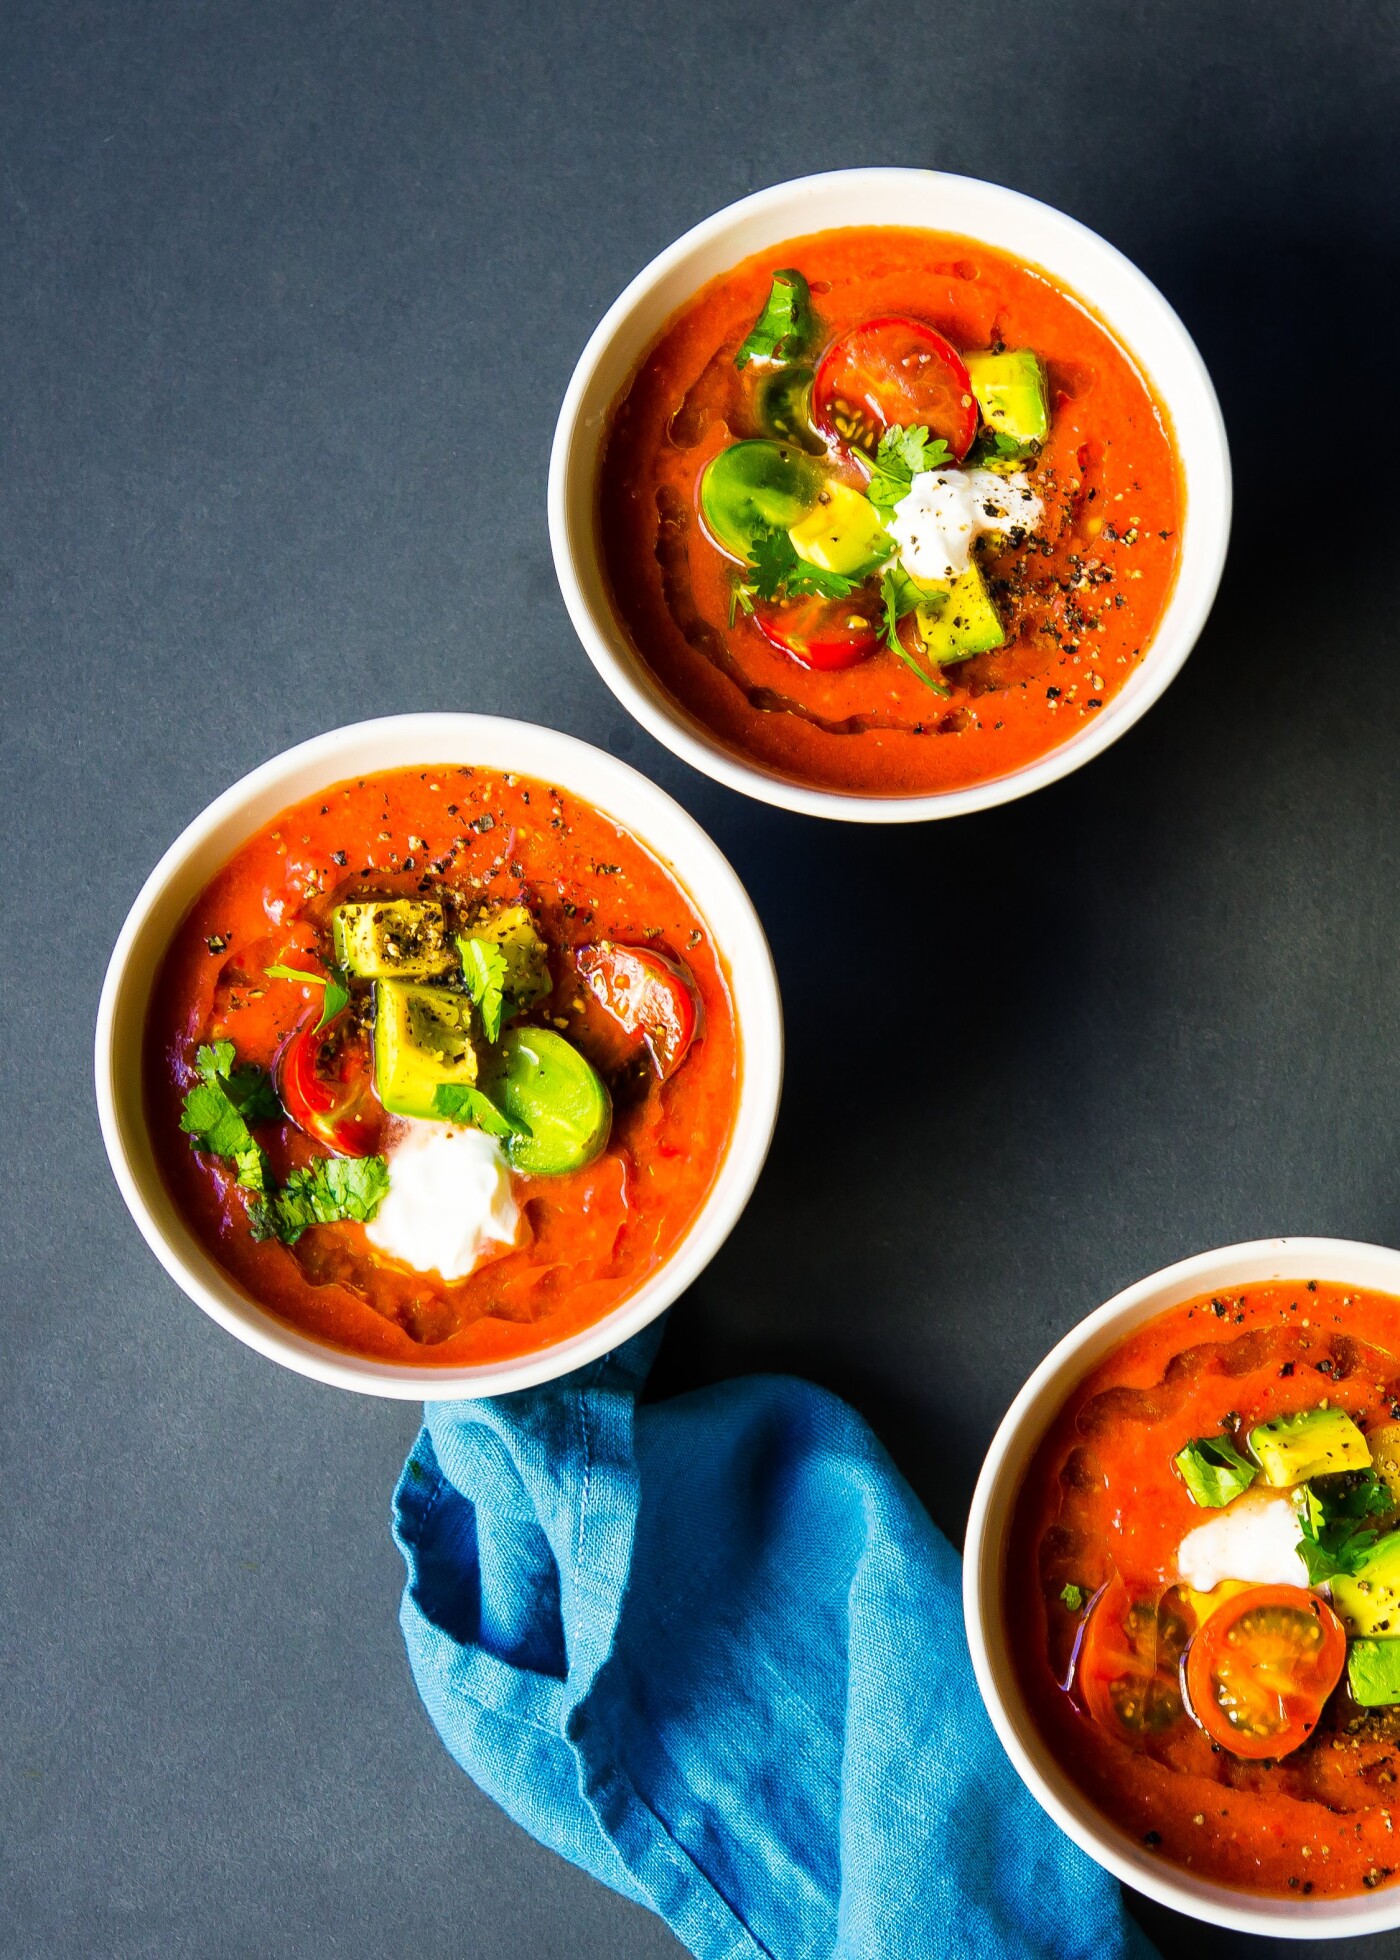 As last days of summer coming to an end, this chilled heirloom tomato gazpacho soup with olive oil, red wine vinegar, sweet onions, garlic cloves, jalapeño and ground coriander leaves one with a refreshing memory of the season.  Its vibrant color and creamy texture capture the essence of summer so well!